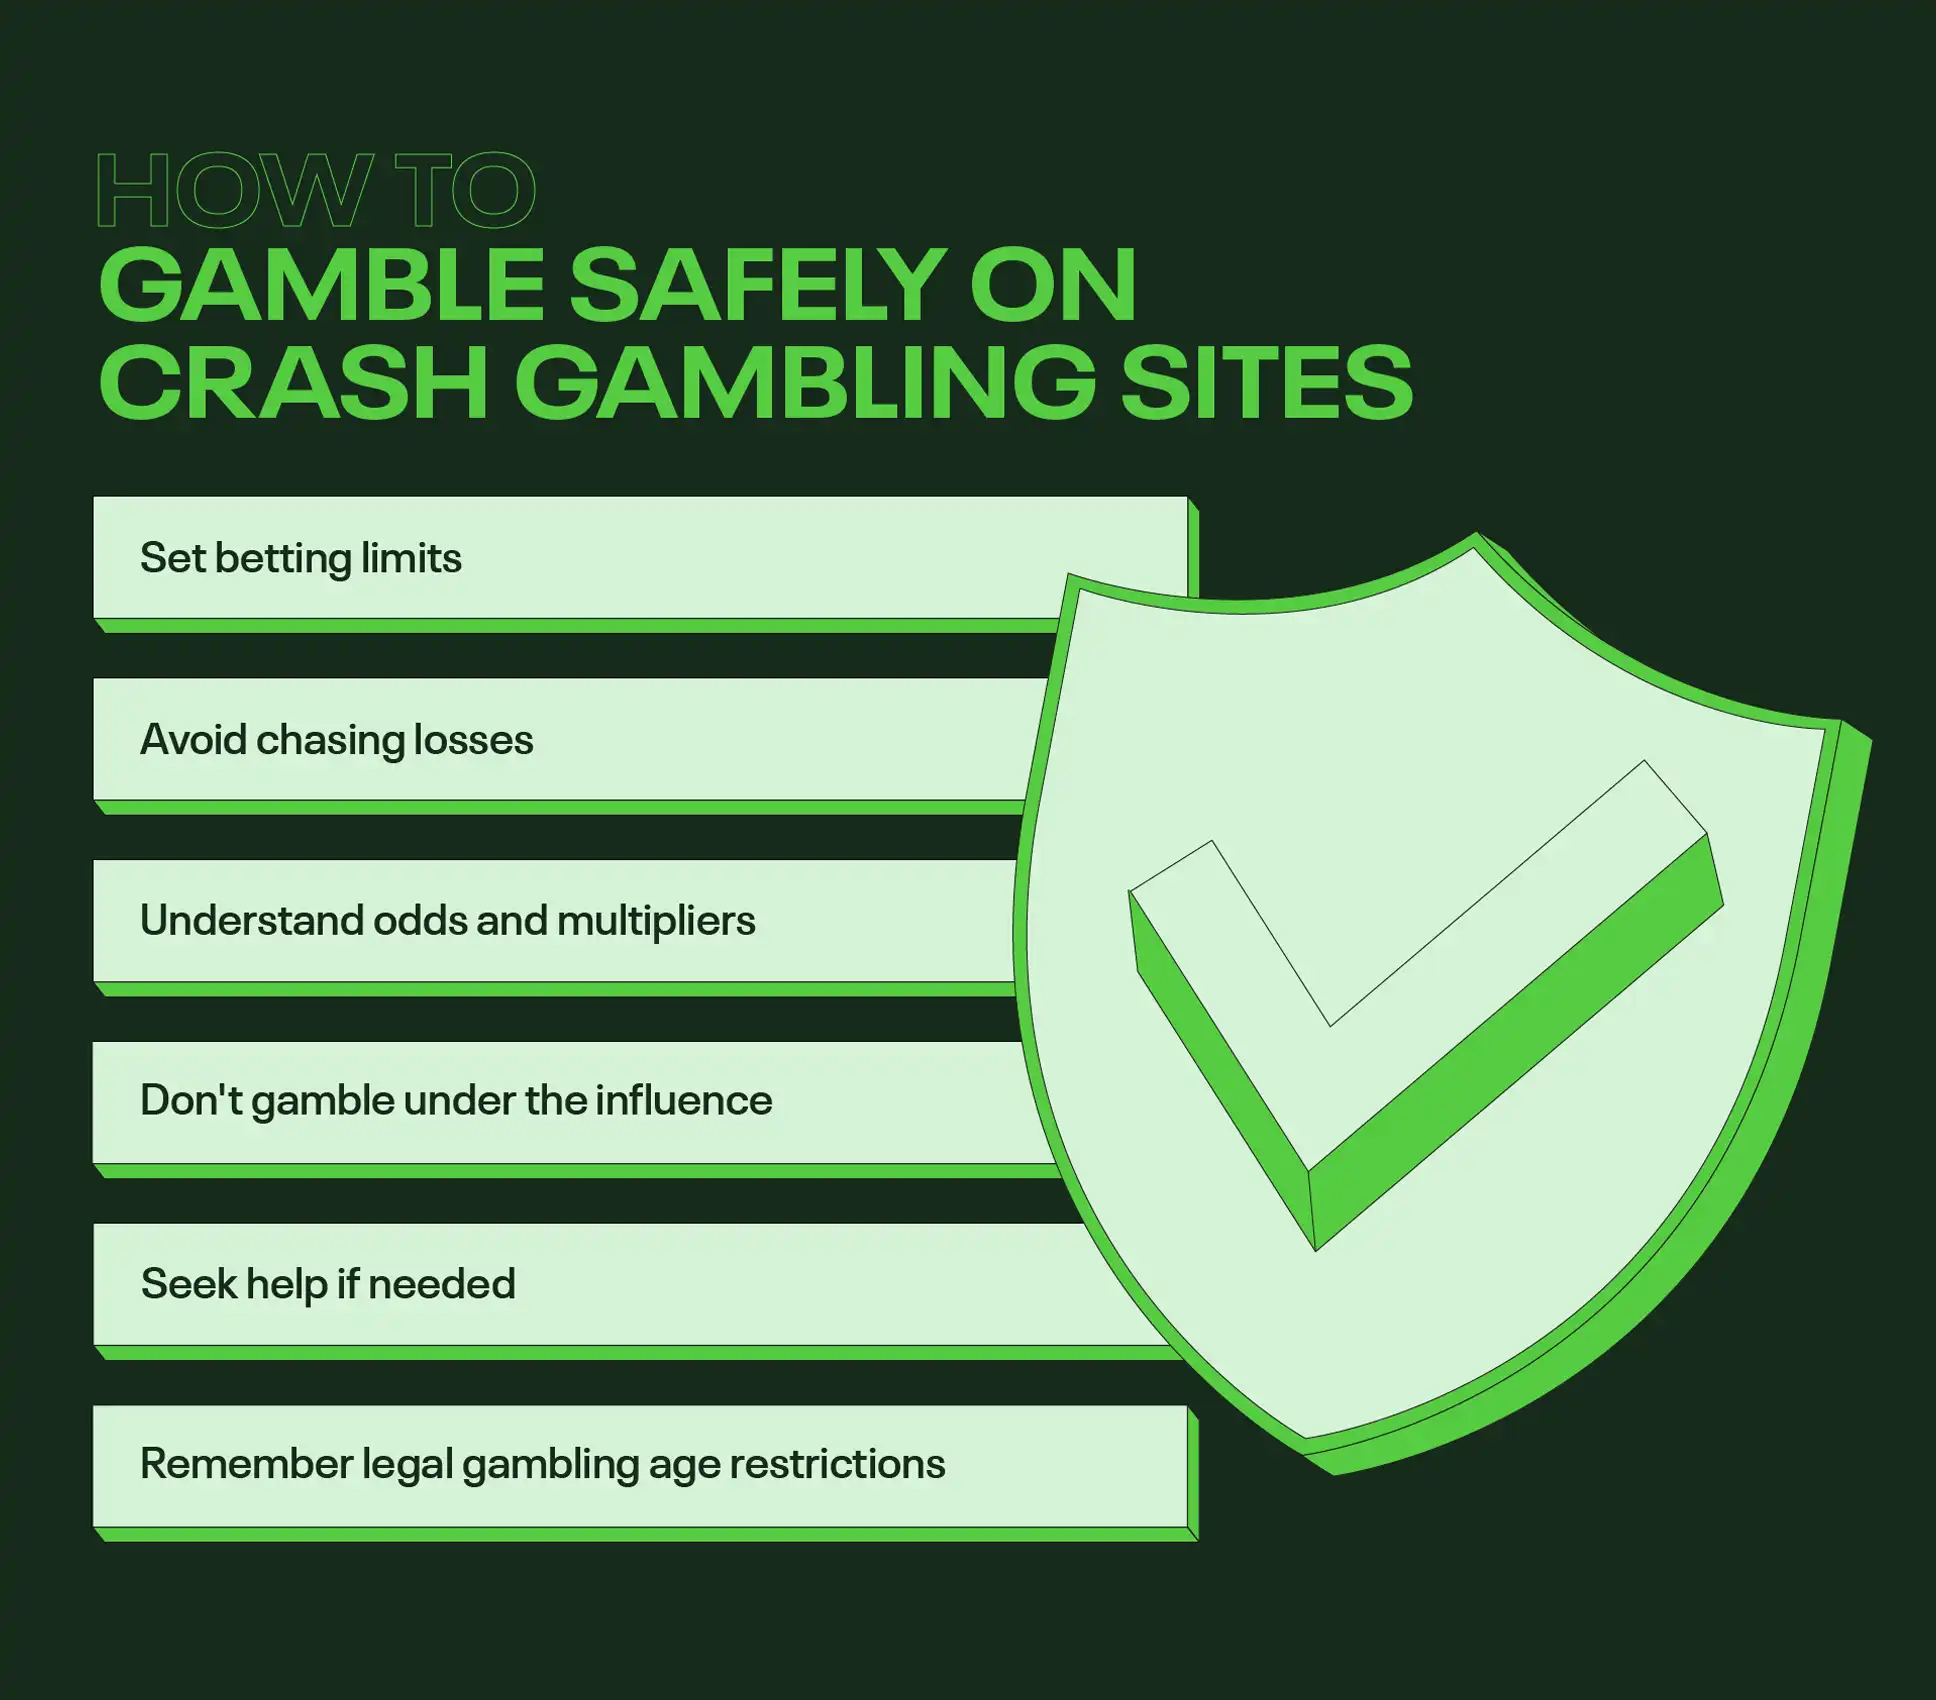 How to gamble safely on crypto crash gambling sites